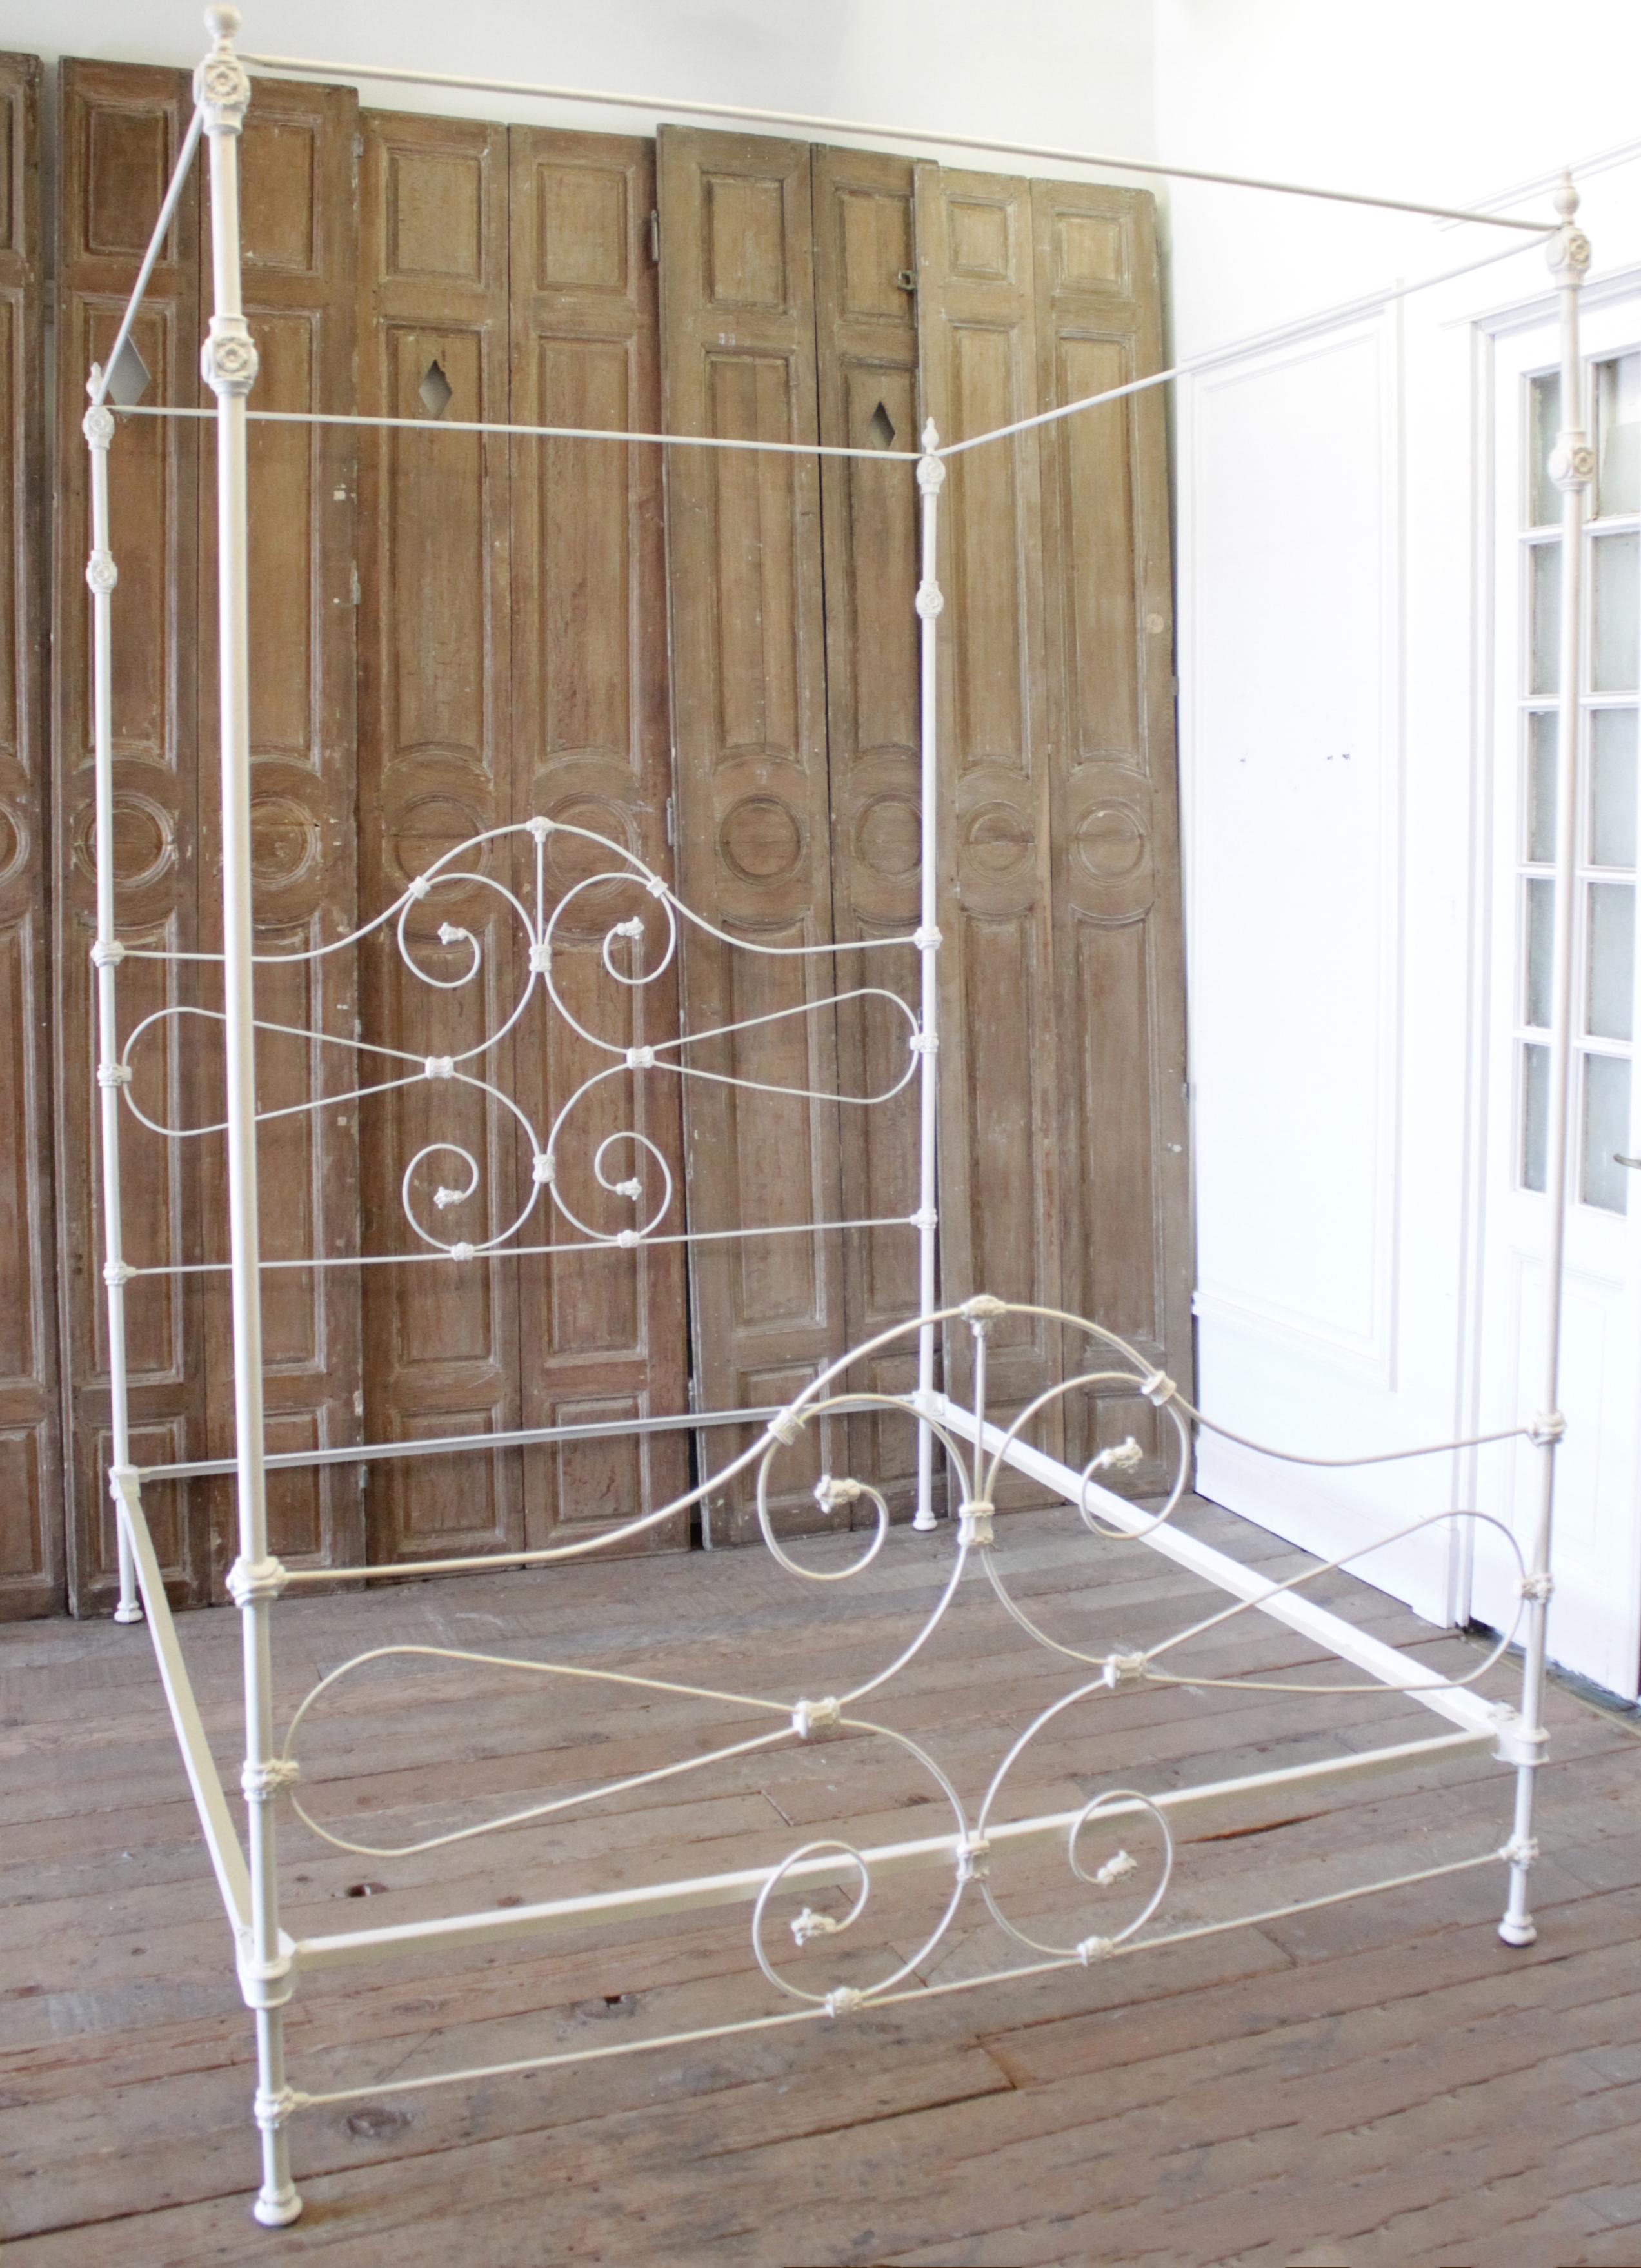 Vintage Cal King iron canopy bed
Painted in a soft white color.
The canopy can be extended to two different heights as shown in photos with extensions, and without.
Measures 72